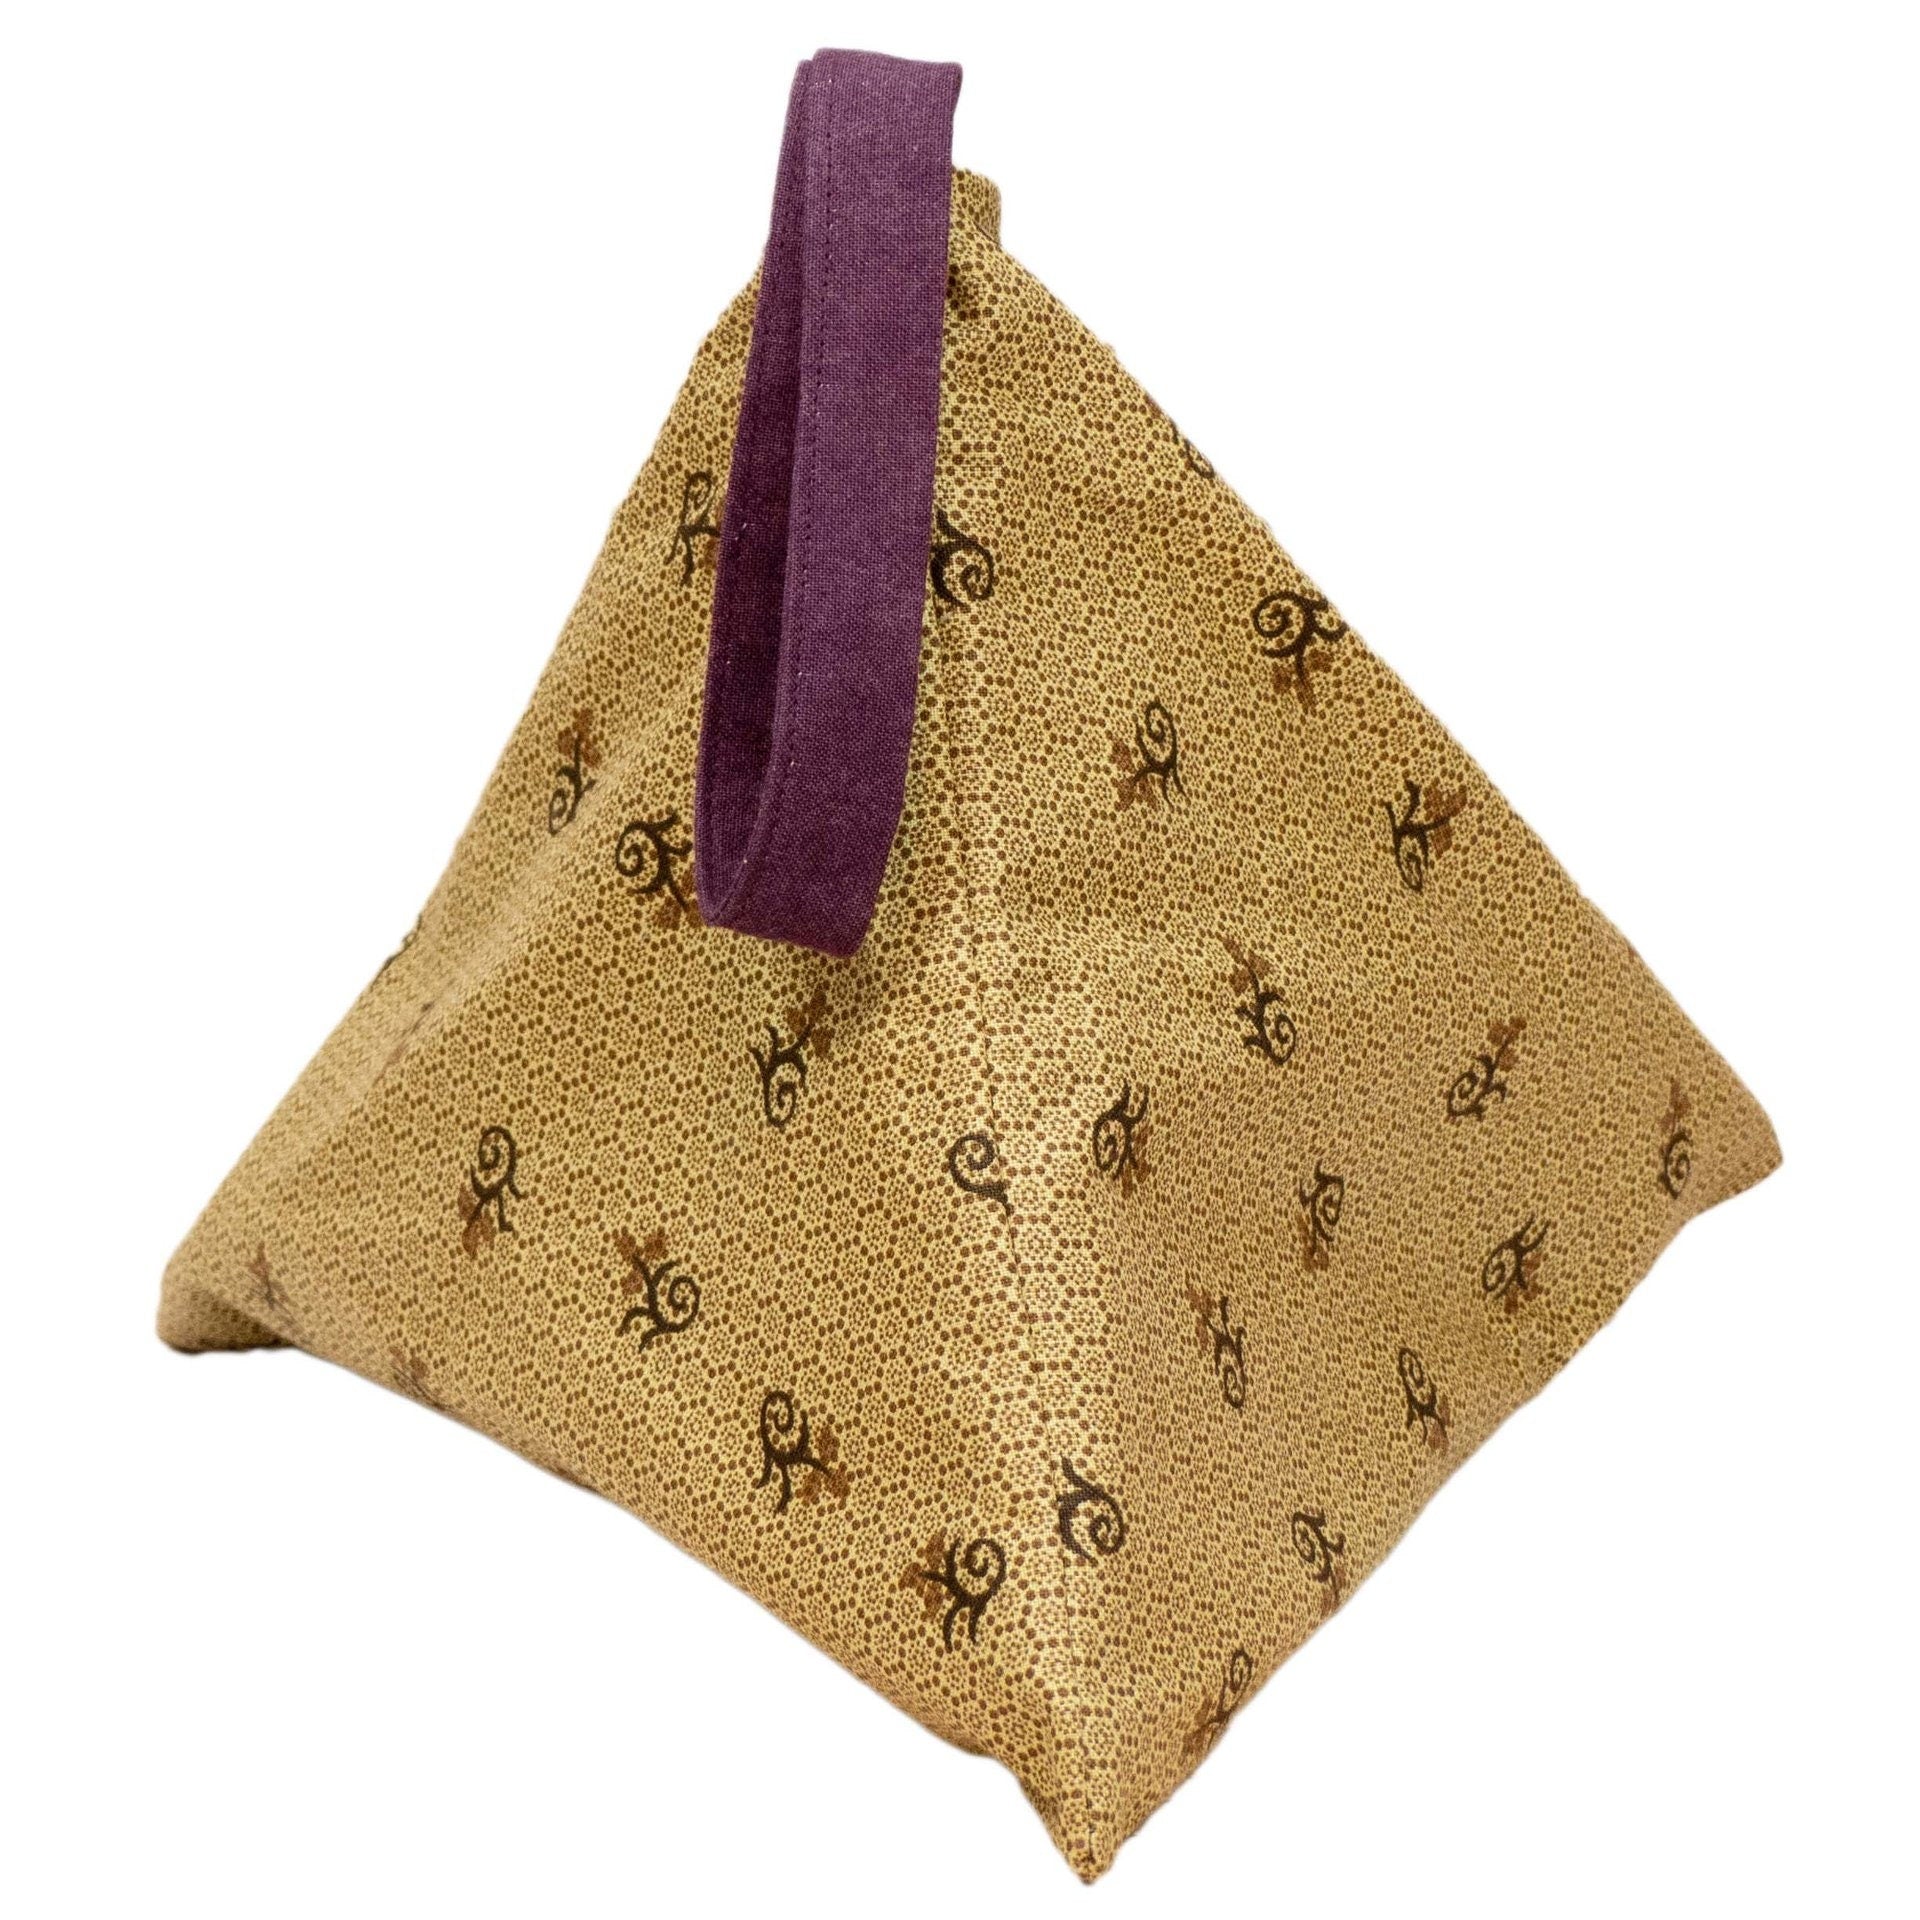 Antique Gold Hexagon Swirl - Llexical Divided Sock Pouch - Knitting, Crochet, Spinning Project Bag